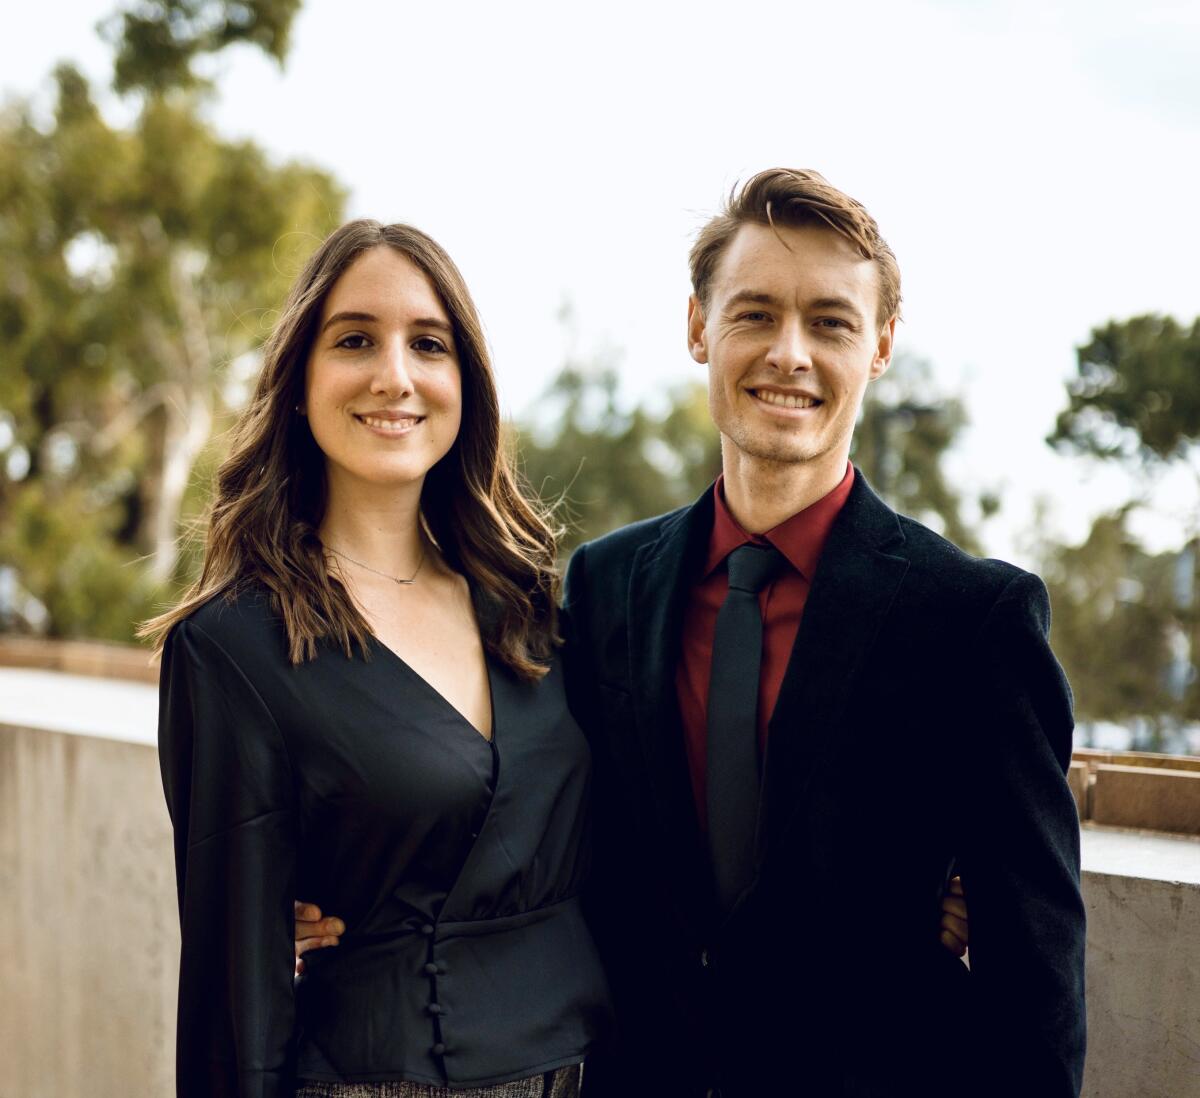 Sarah and Alex Stein are the founders of Point Loma-based tutoring and mentoring company Tutors and Friends.